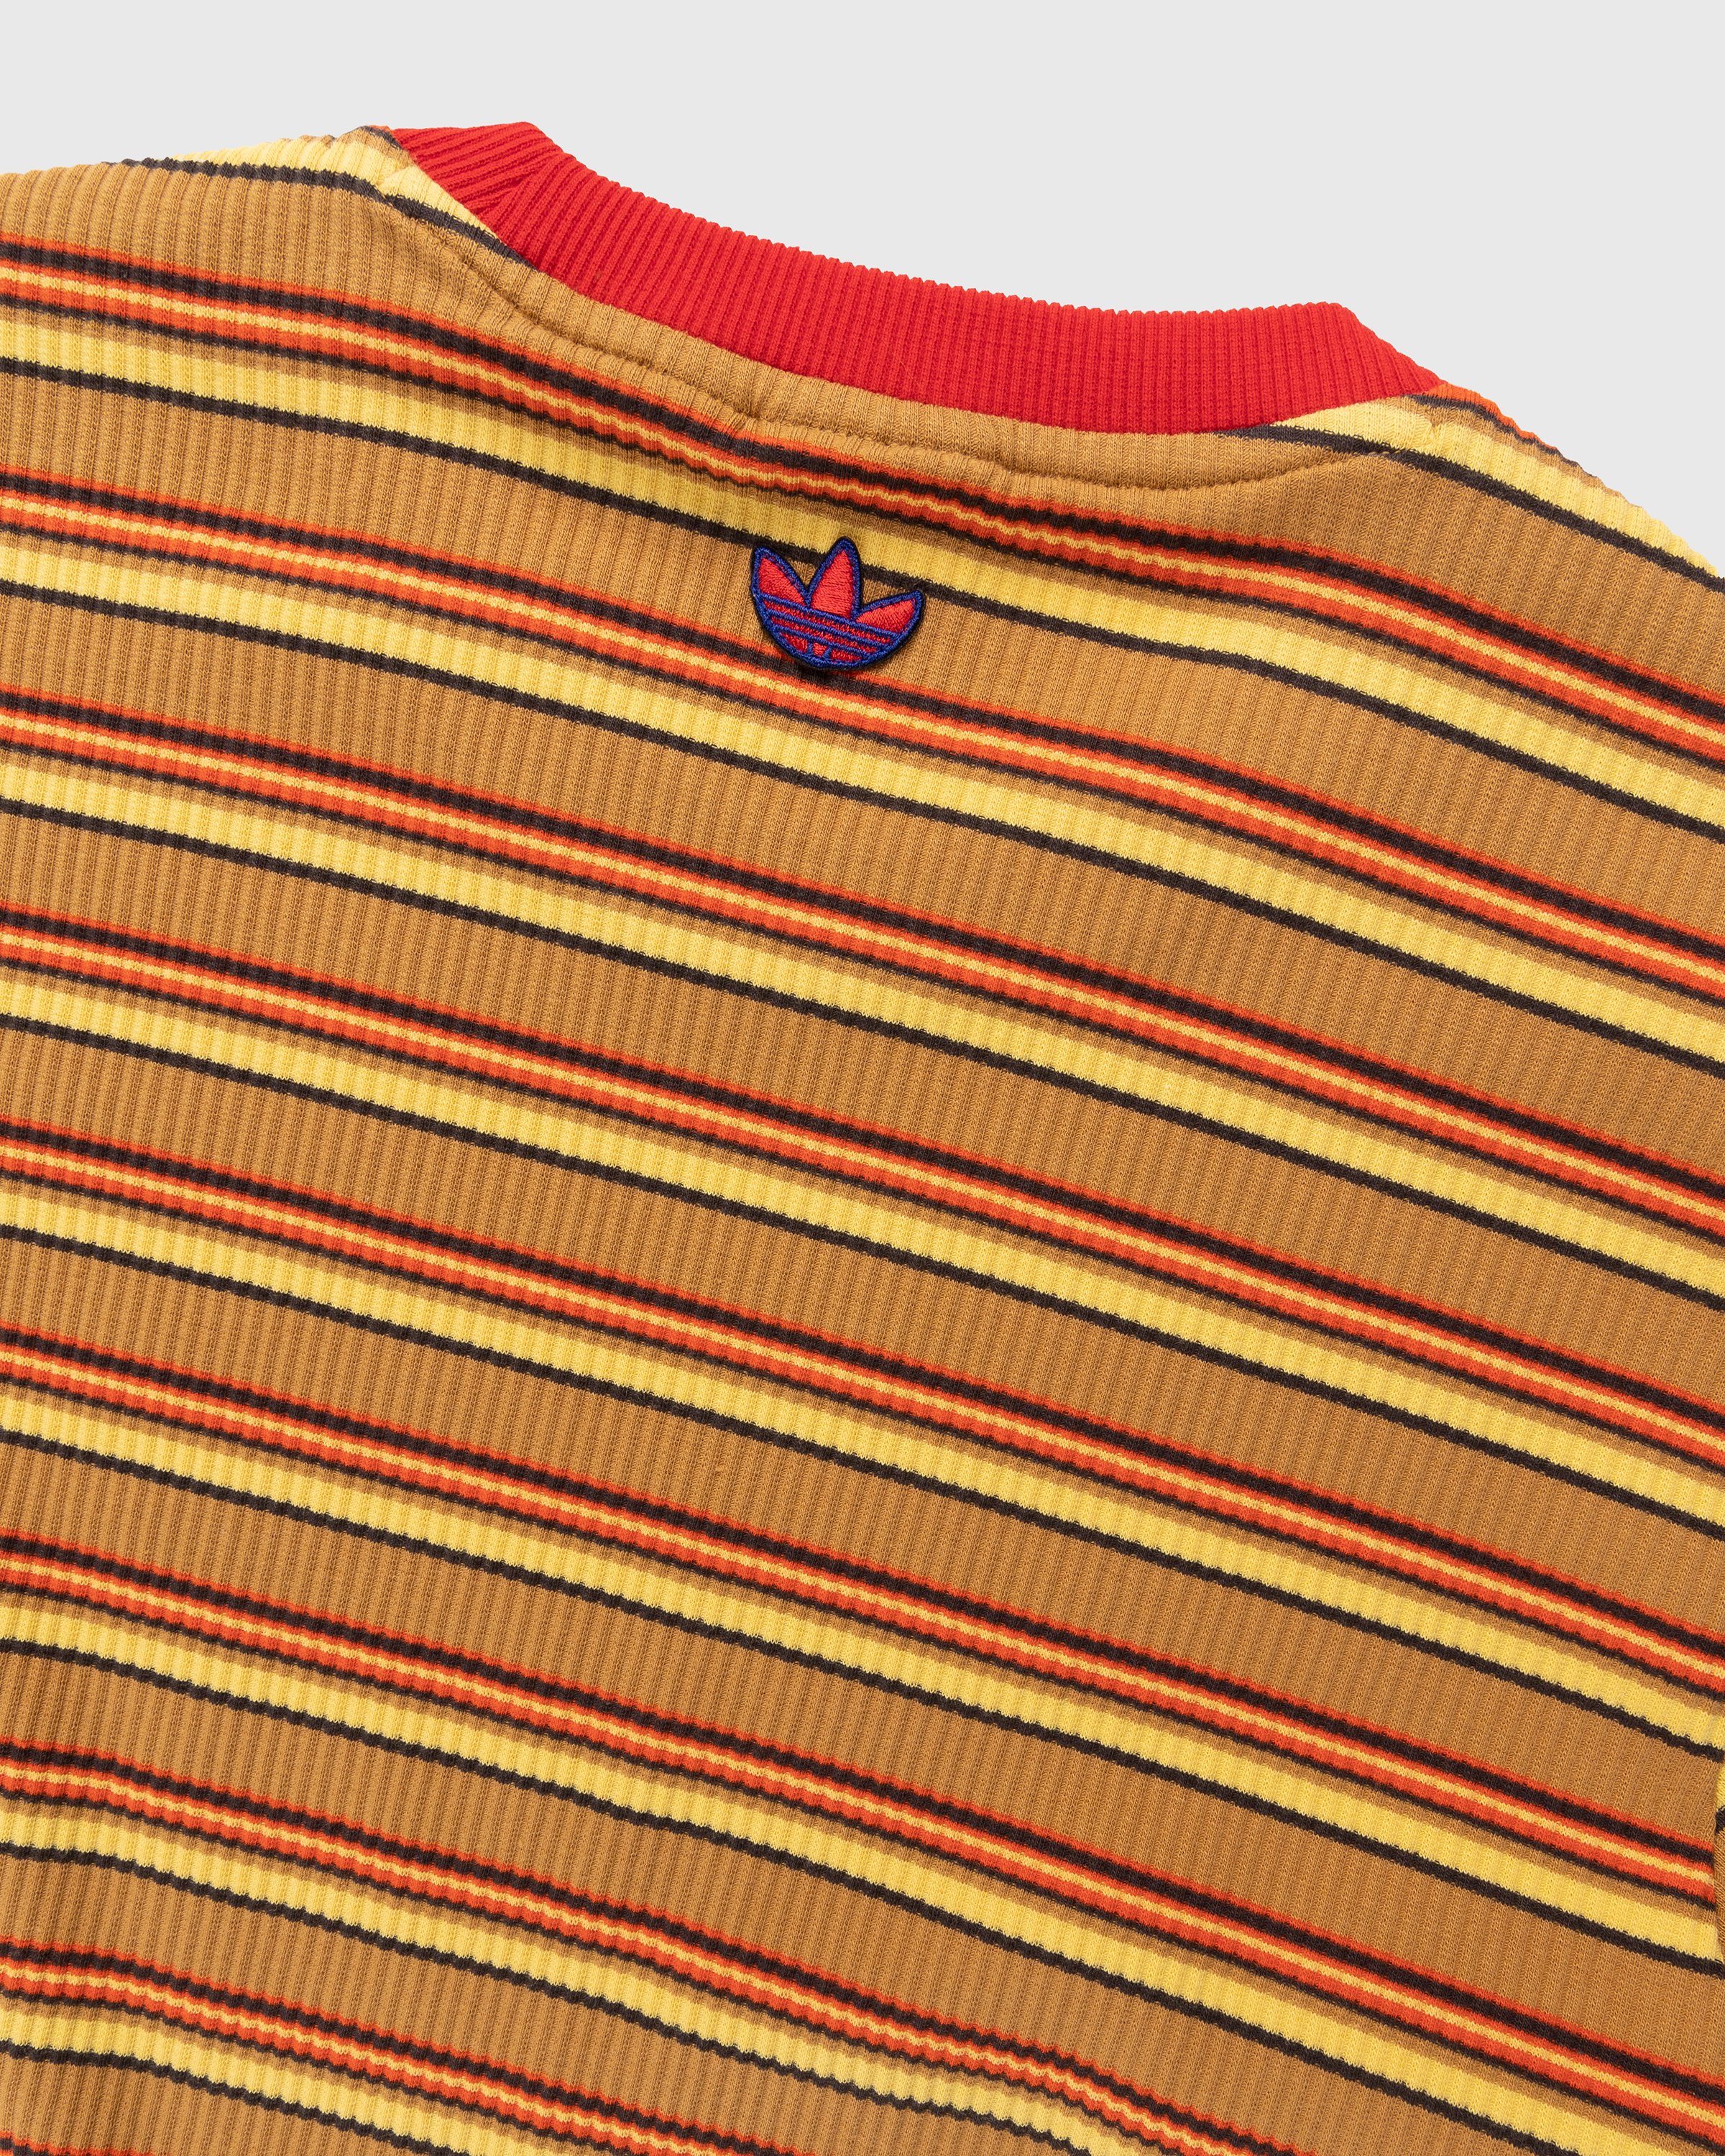 Adidas x Wales Bonner - WB Striped Longsleeve St Fade Gold/Scarlet - Clothing - Red - Image 6